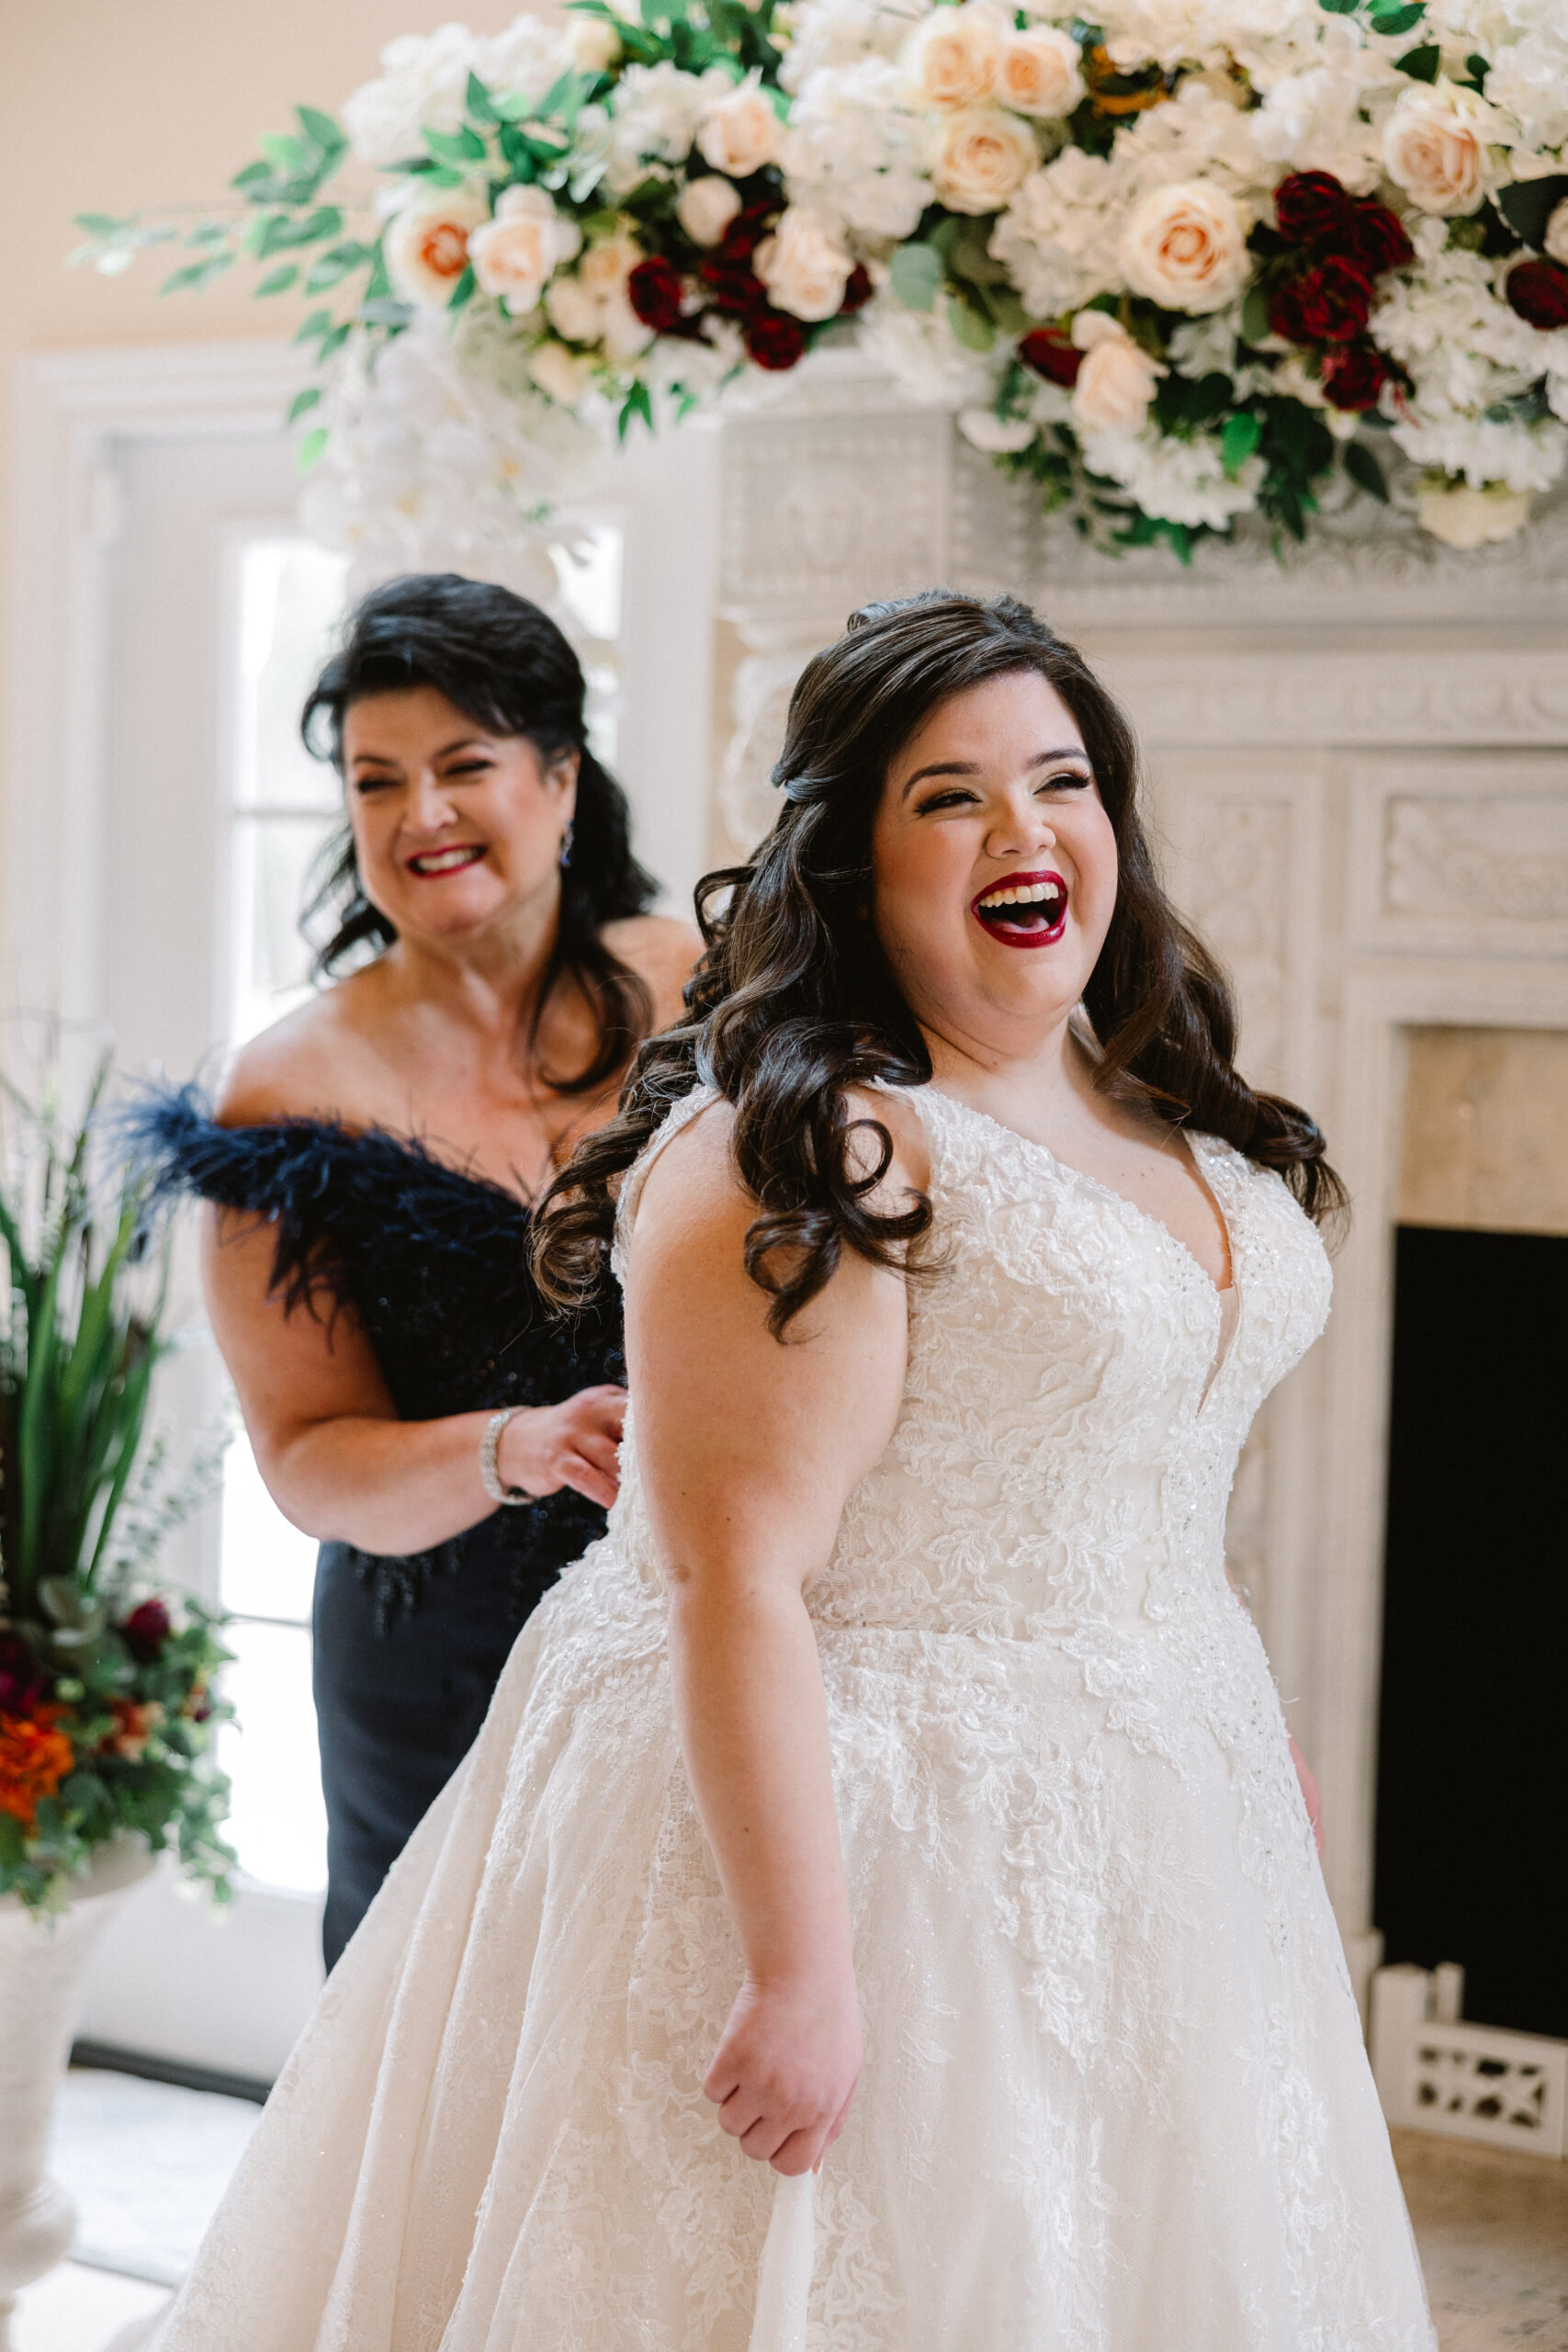 other of the bride zipping up the bride's dress, both smiling and laughing with hair and makeup done by Kristys Artistry Design Team.